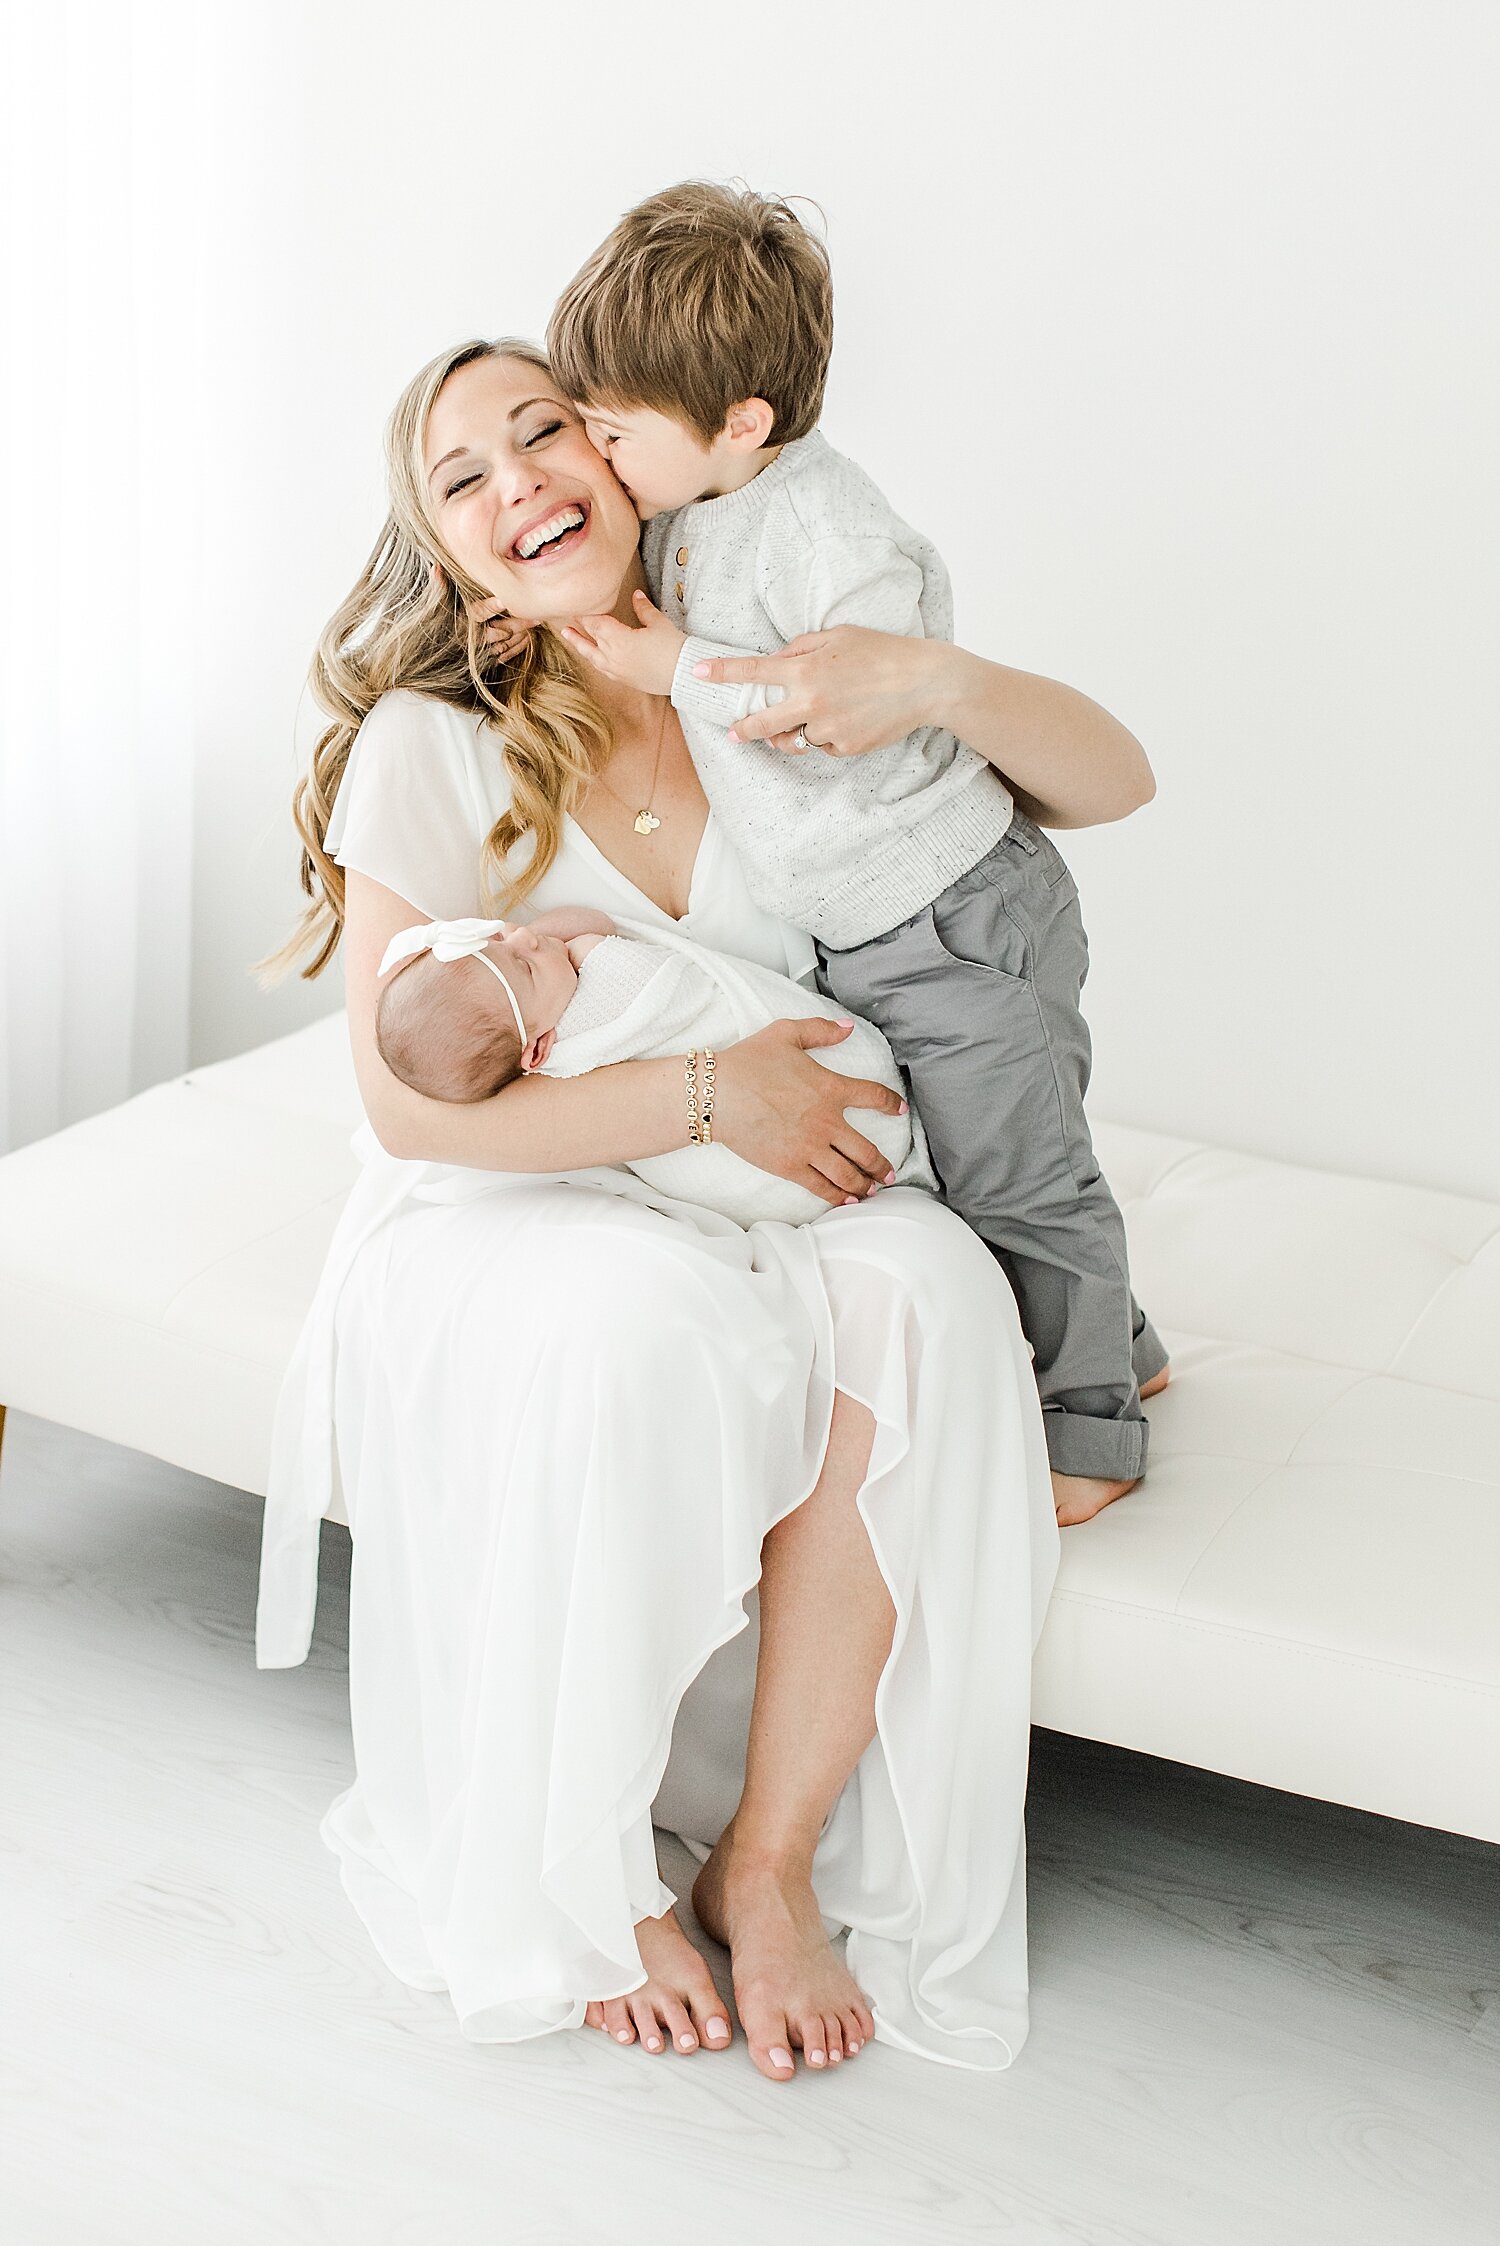 Toddler giving Mom a hug and kiss while she holds his baby sister. Kristin Wood Photography is sharing tips for how to have a successful newborn session with a toddler.